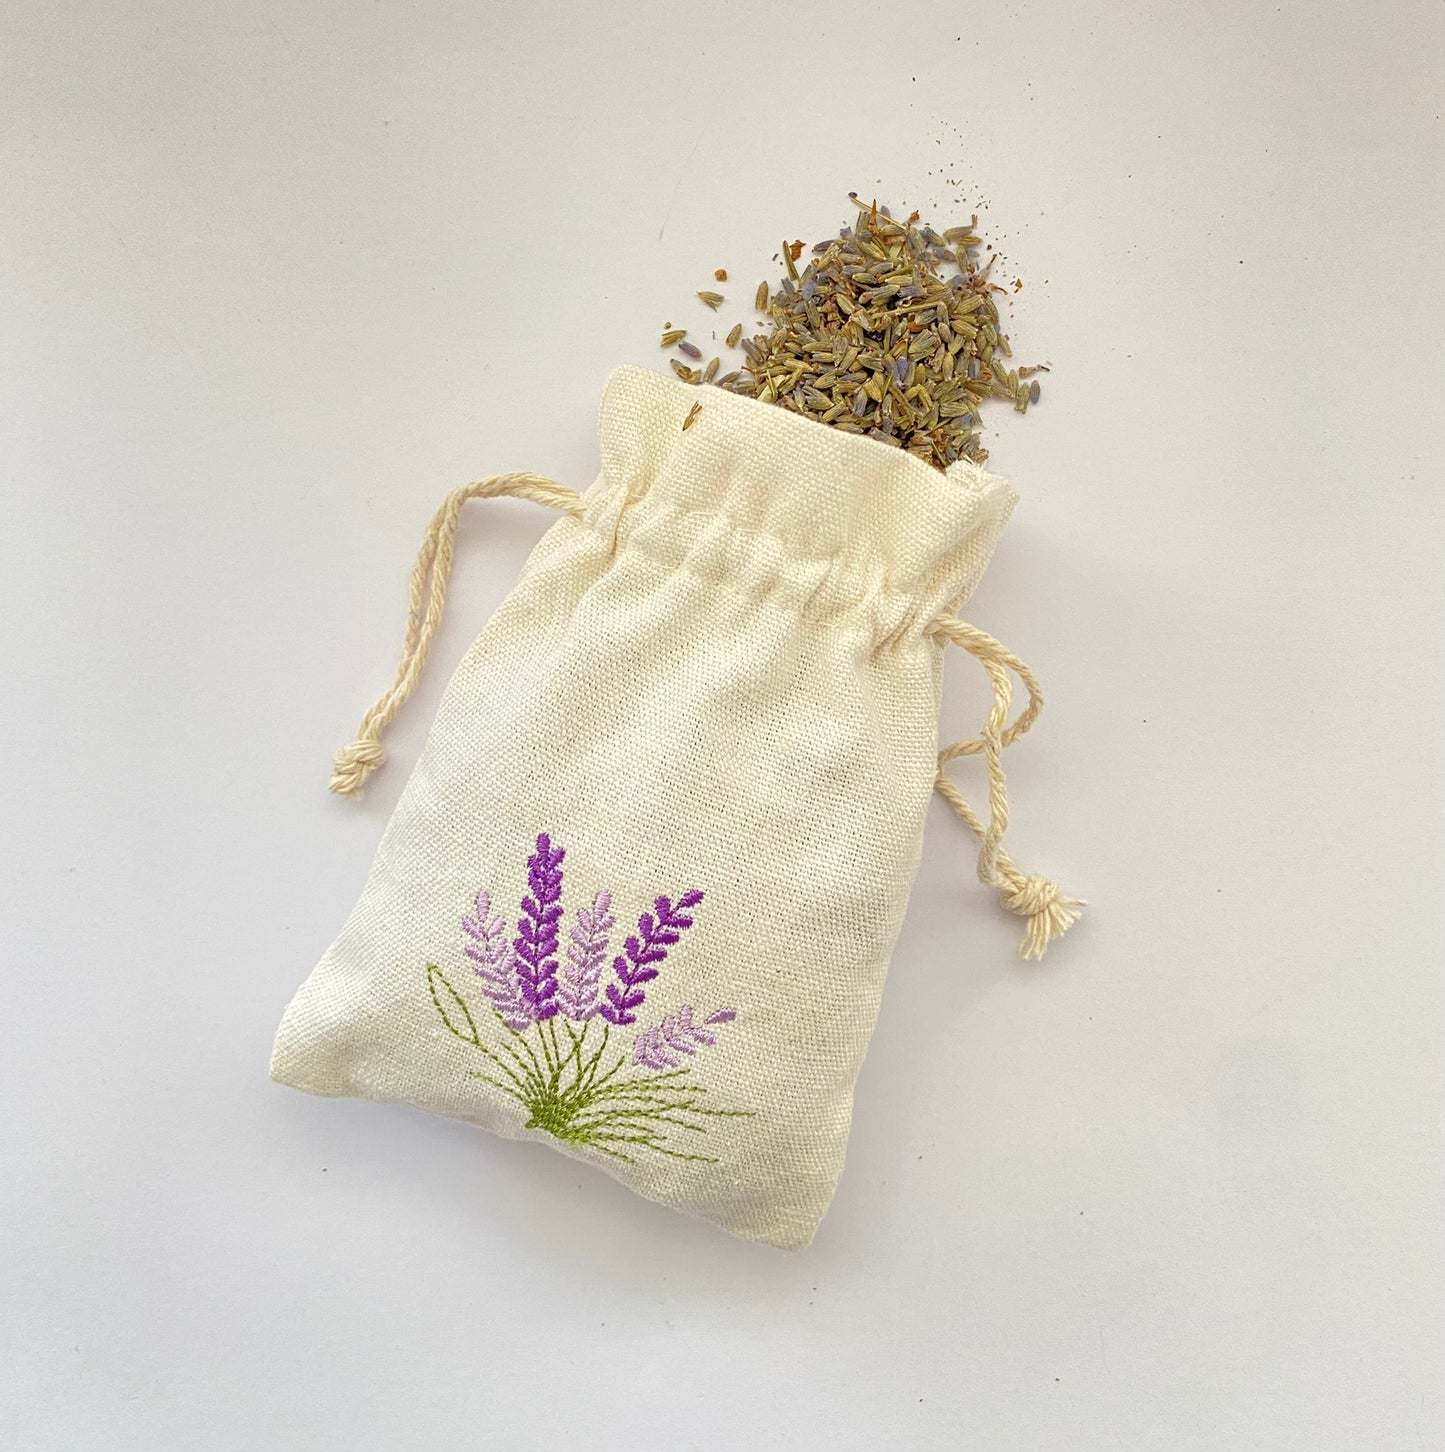 Six Handmade Embroidered Sachet Bags with Organic Lavender